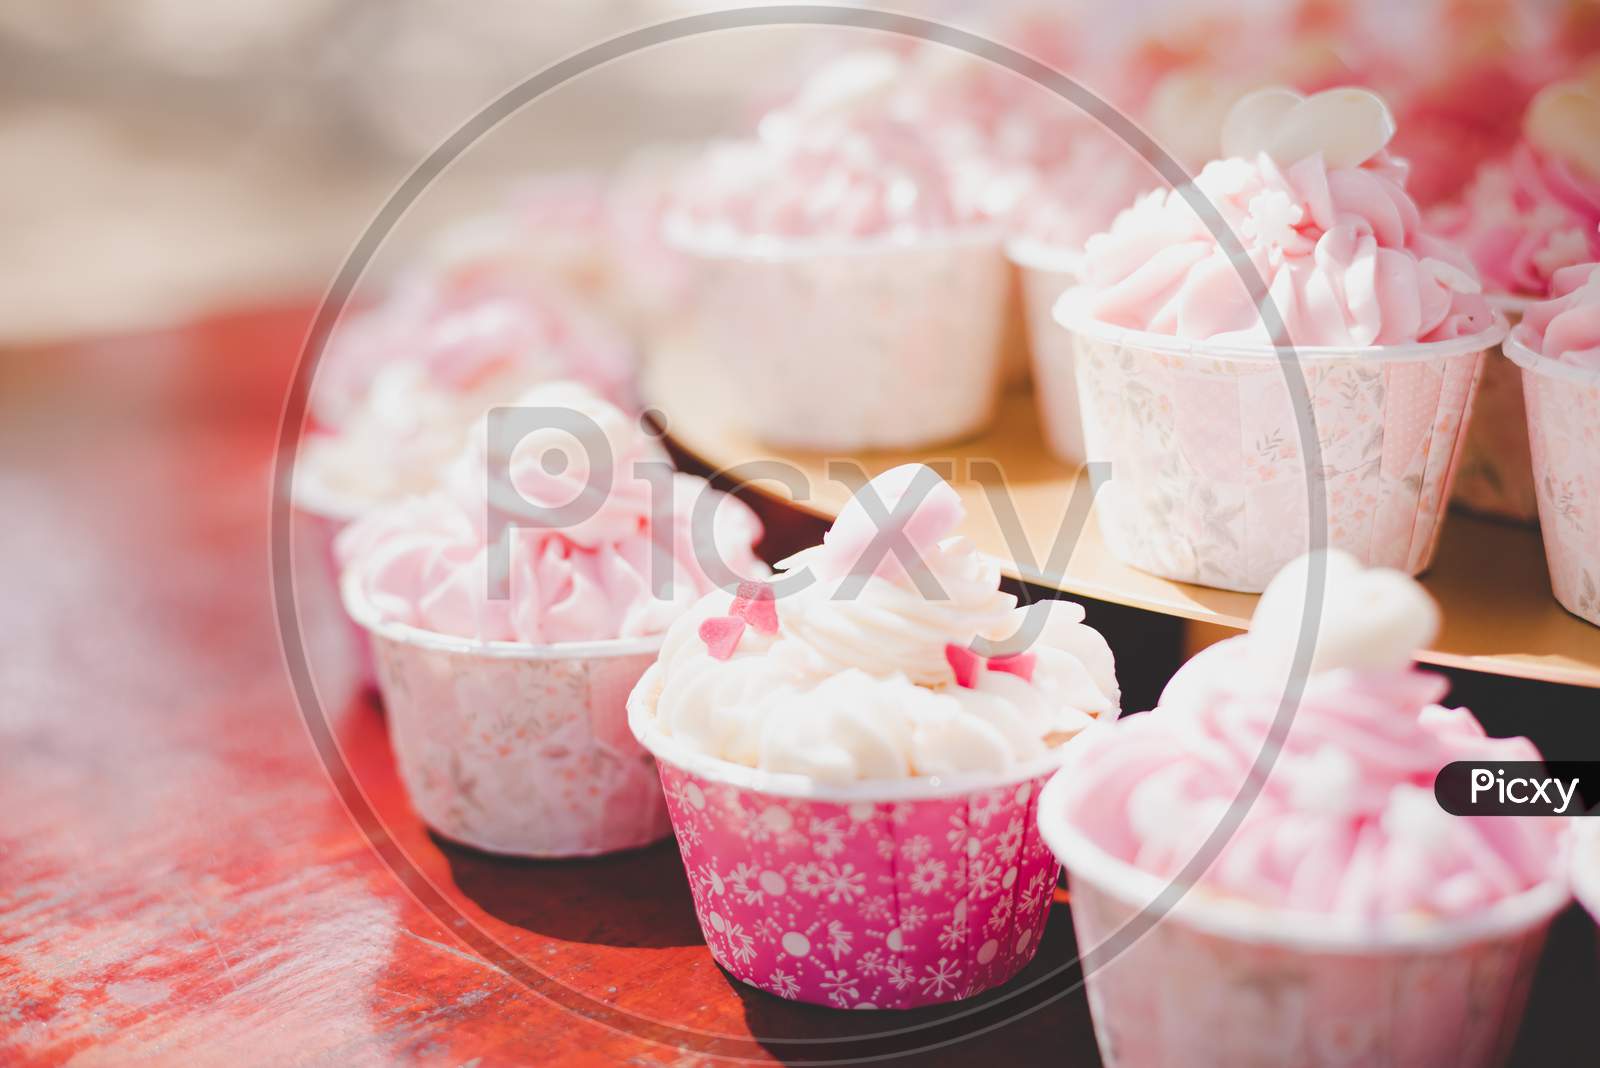 Pink Cup Cakes In Wedding Ceremony. Decoration And Celebration Concept. Food And Dessert Theme.